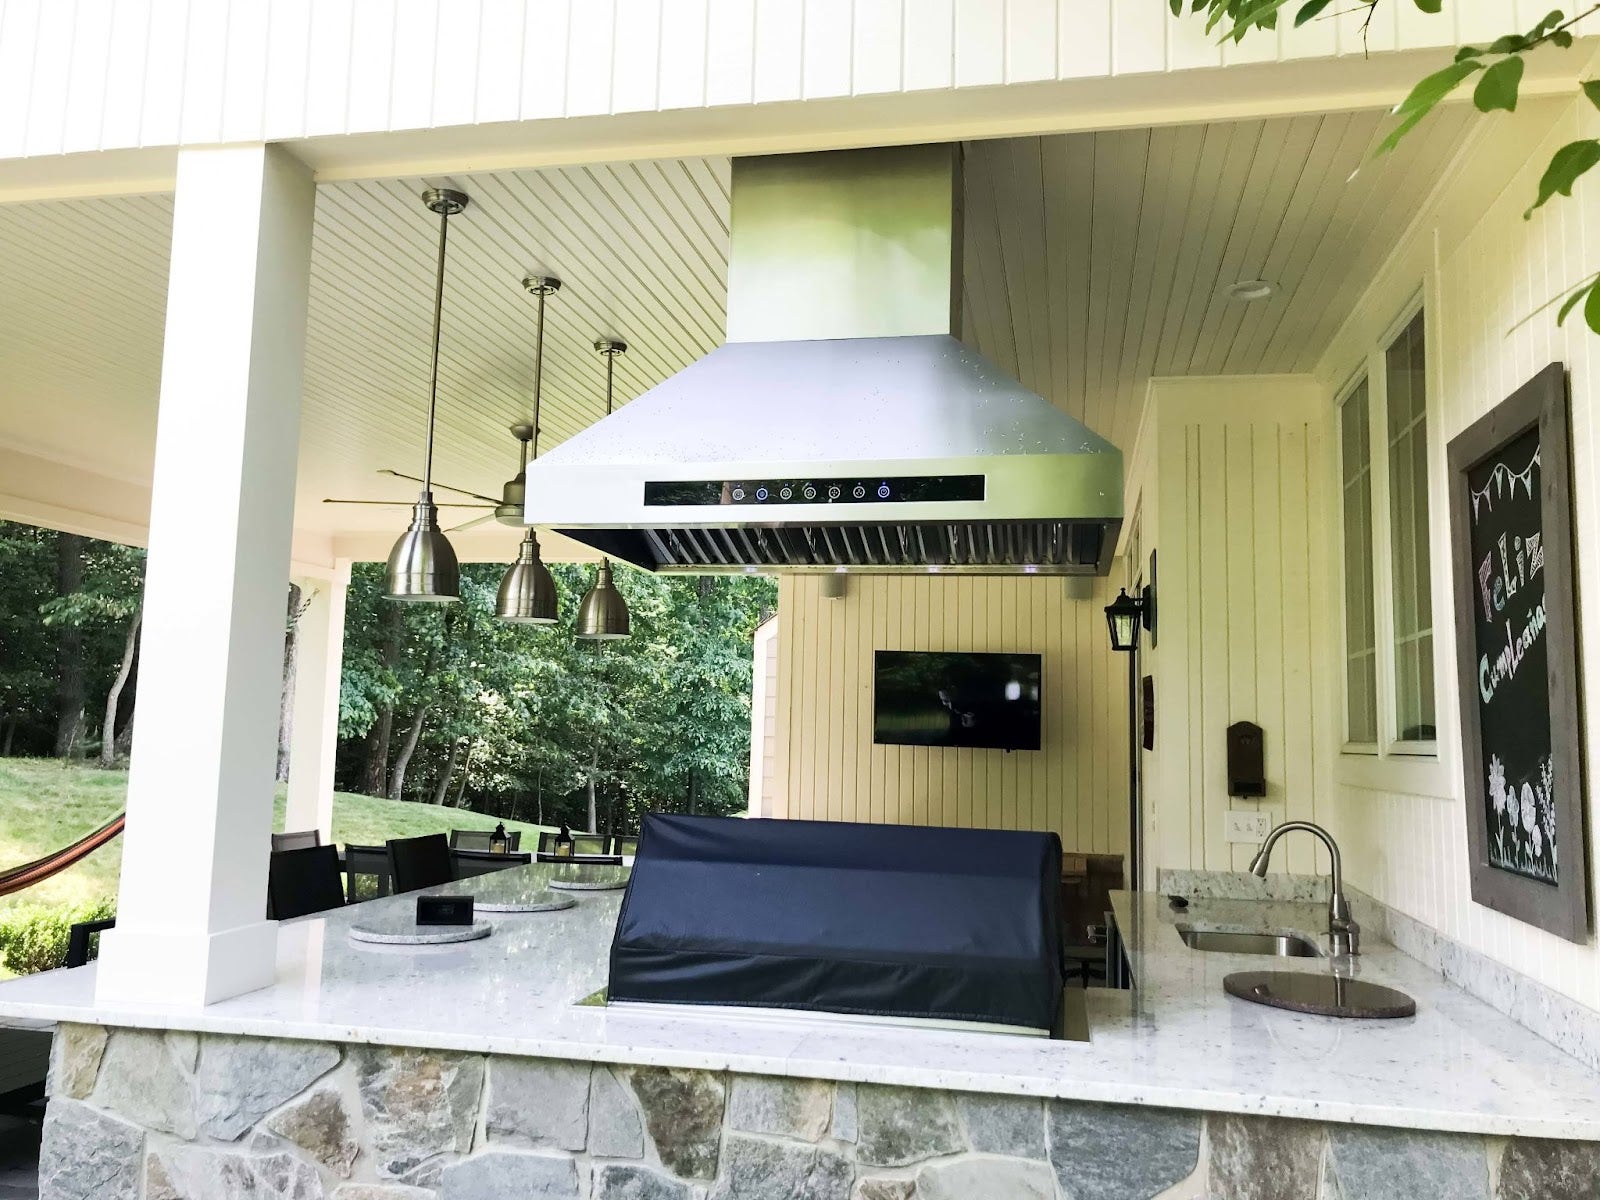 Charming outdoor entertaining area complete with a modern grill under a ventilation hood, ambient lighting, and a TV, all under a covered patio with verdant surroundings. - Proline Range Hoods - prolinerangehoods.com 